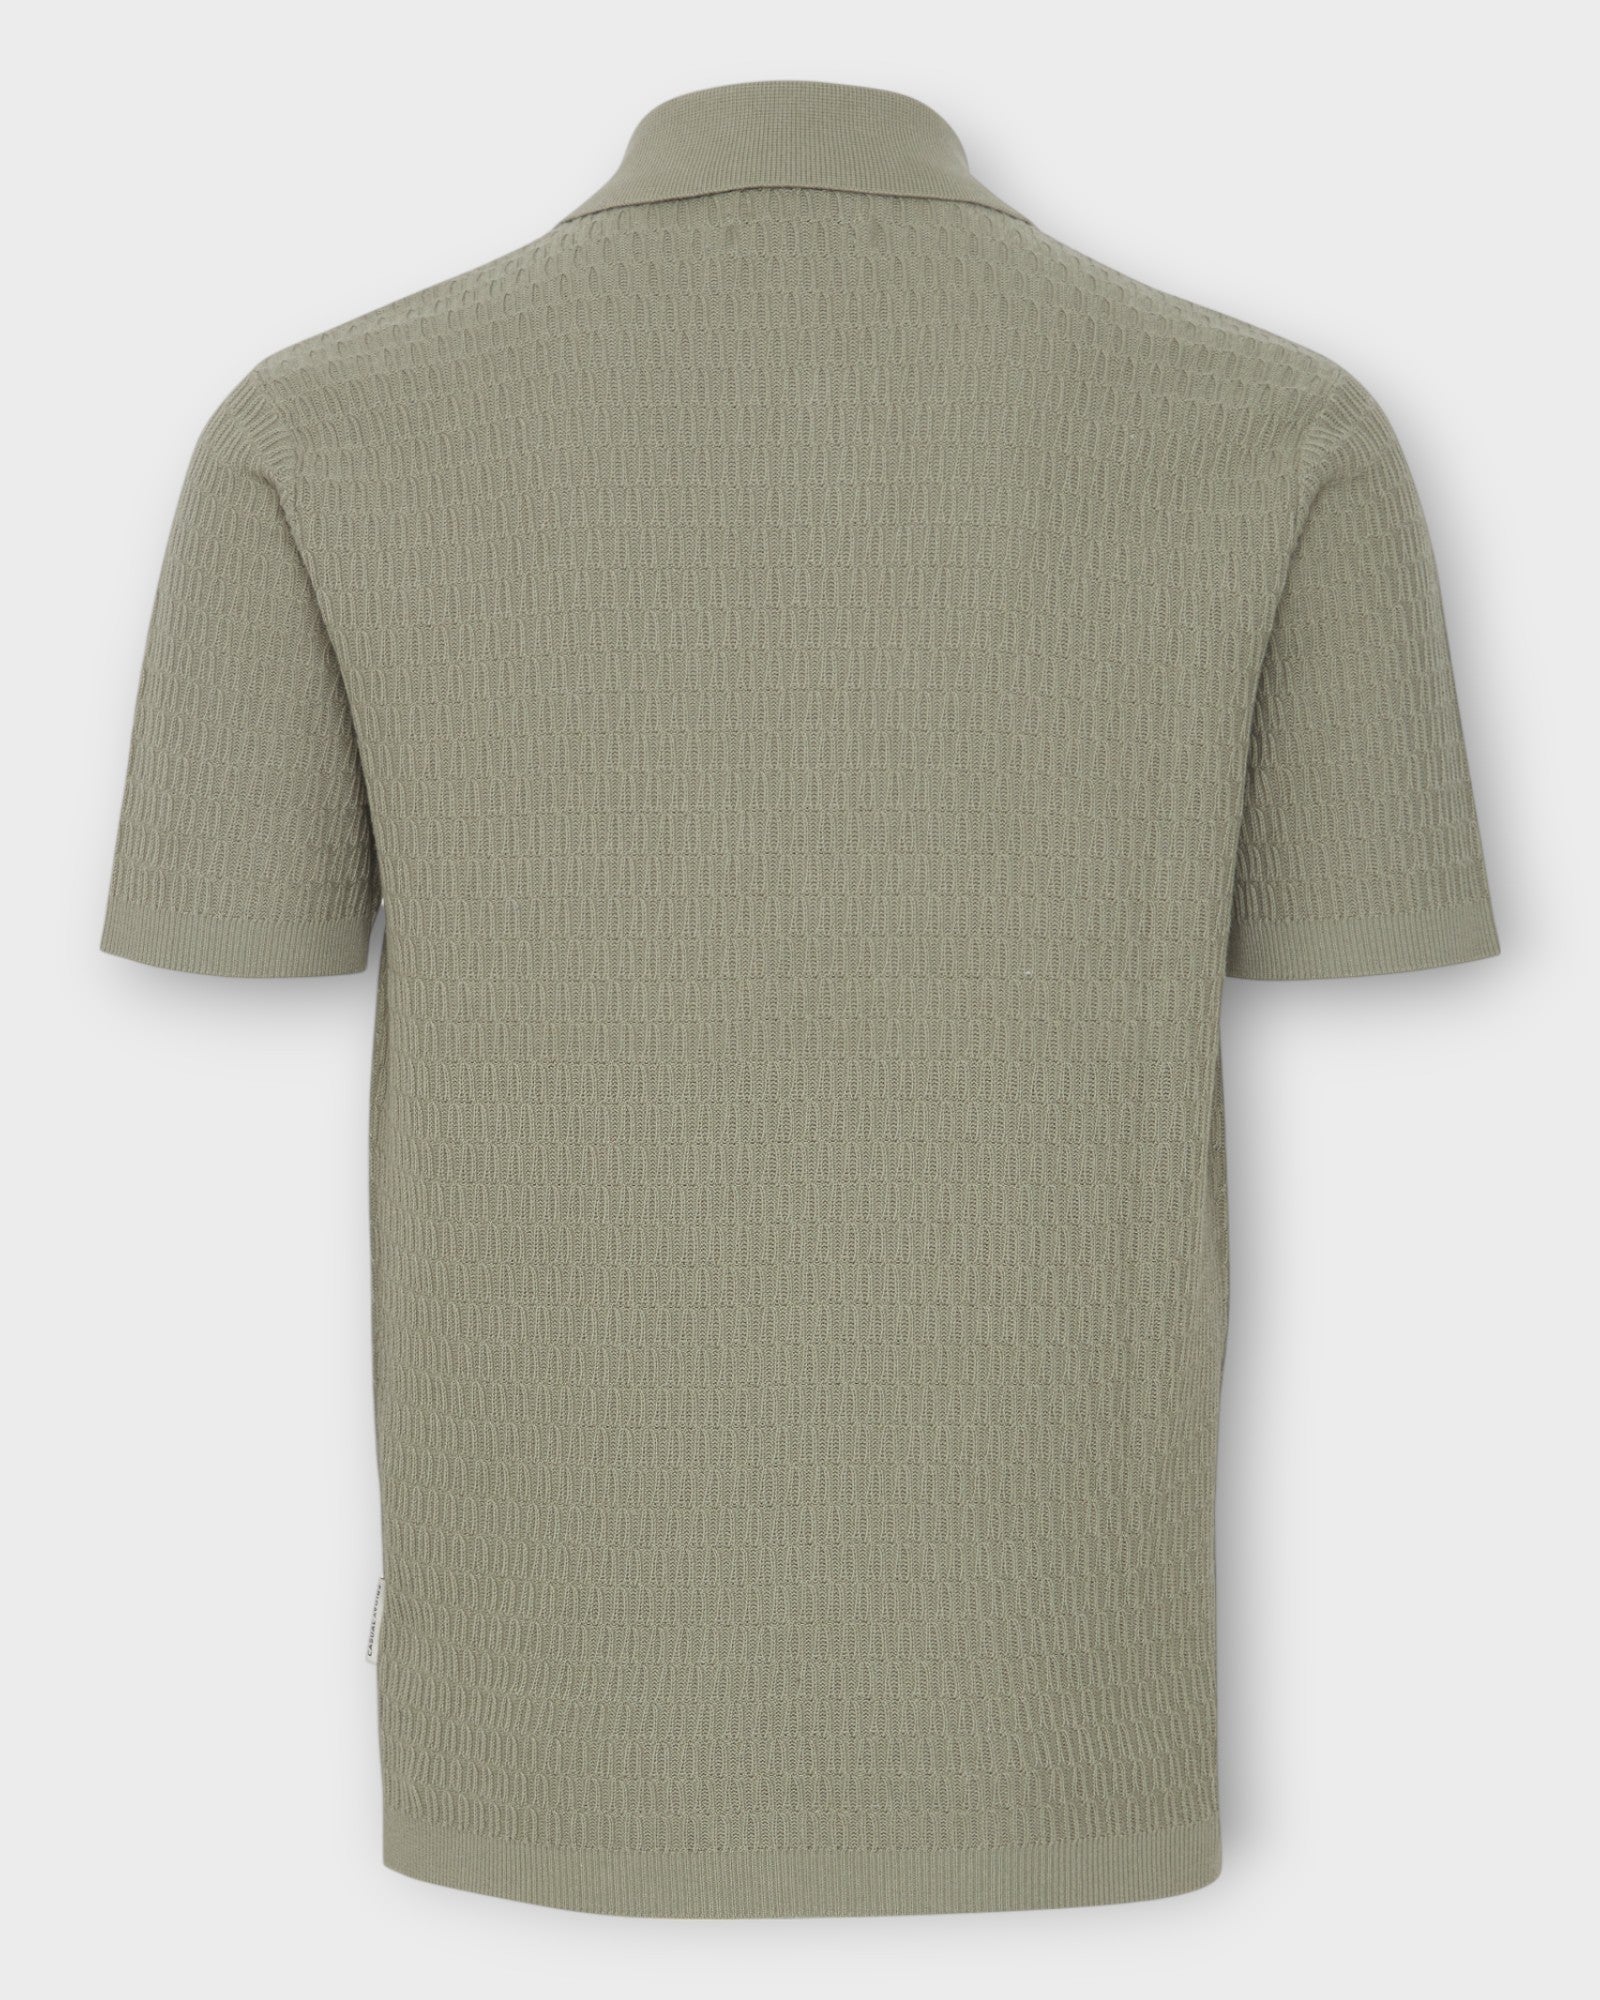 Karl SS Structured Polo Knit - Vetiver